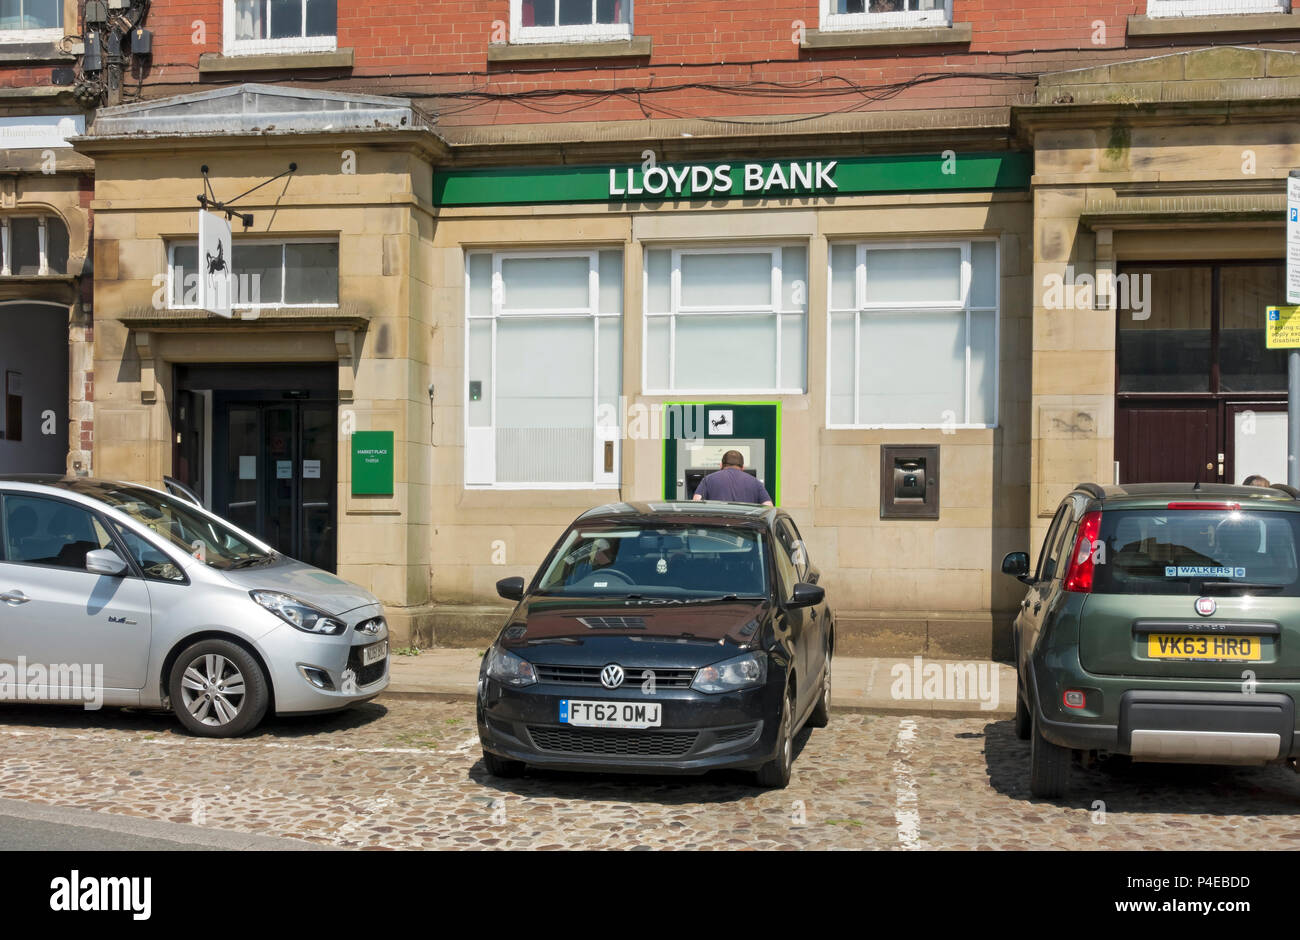 Lloyds Bank branch exterior in the town centre Thirsk North Yorkshire England UK United Kingdom GB Great Britain Stock Photo